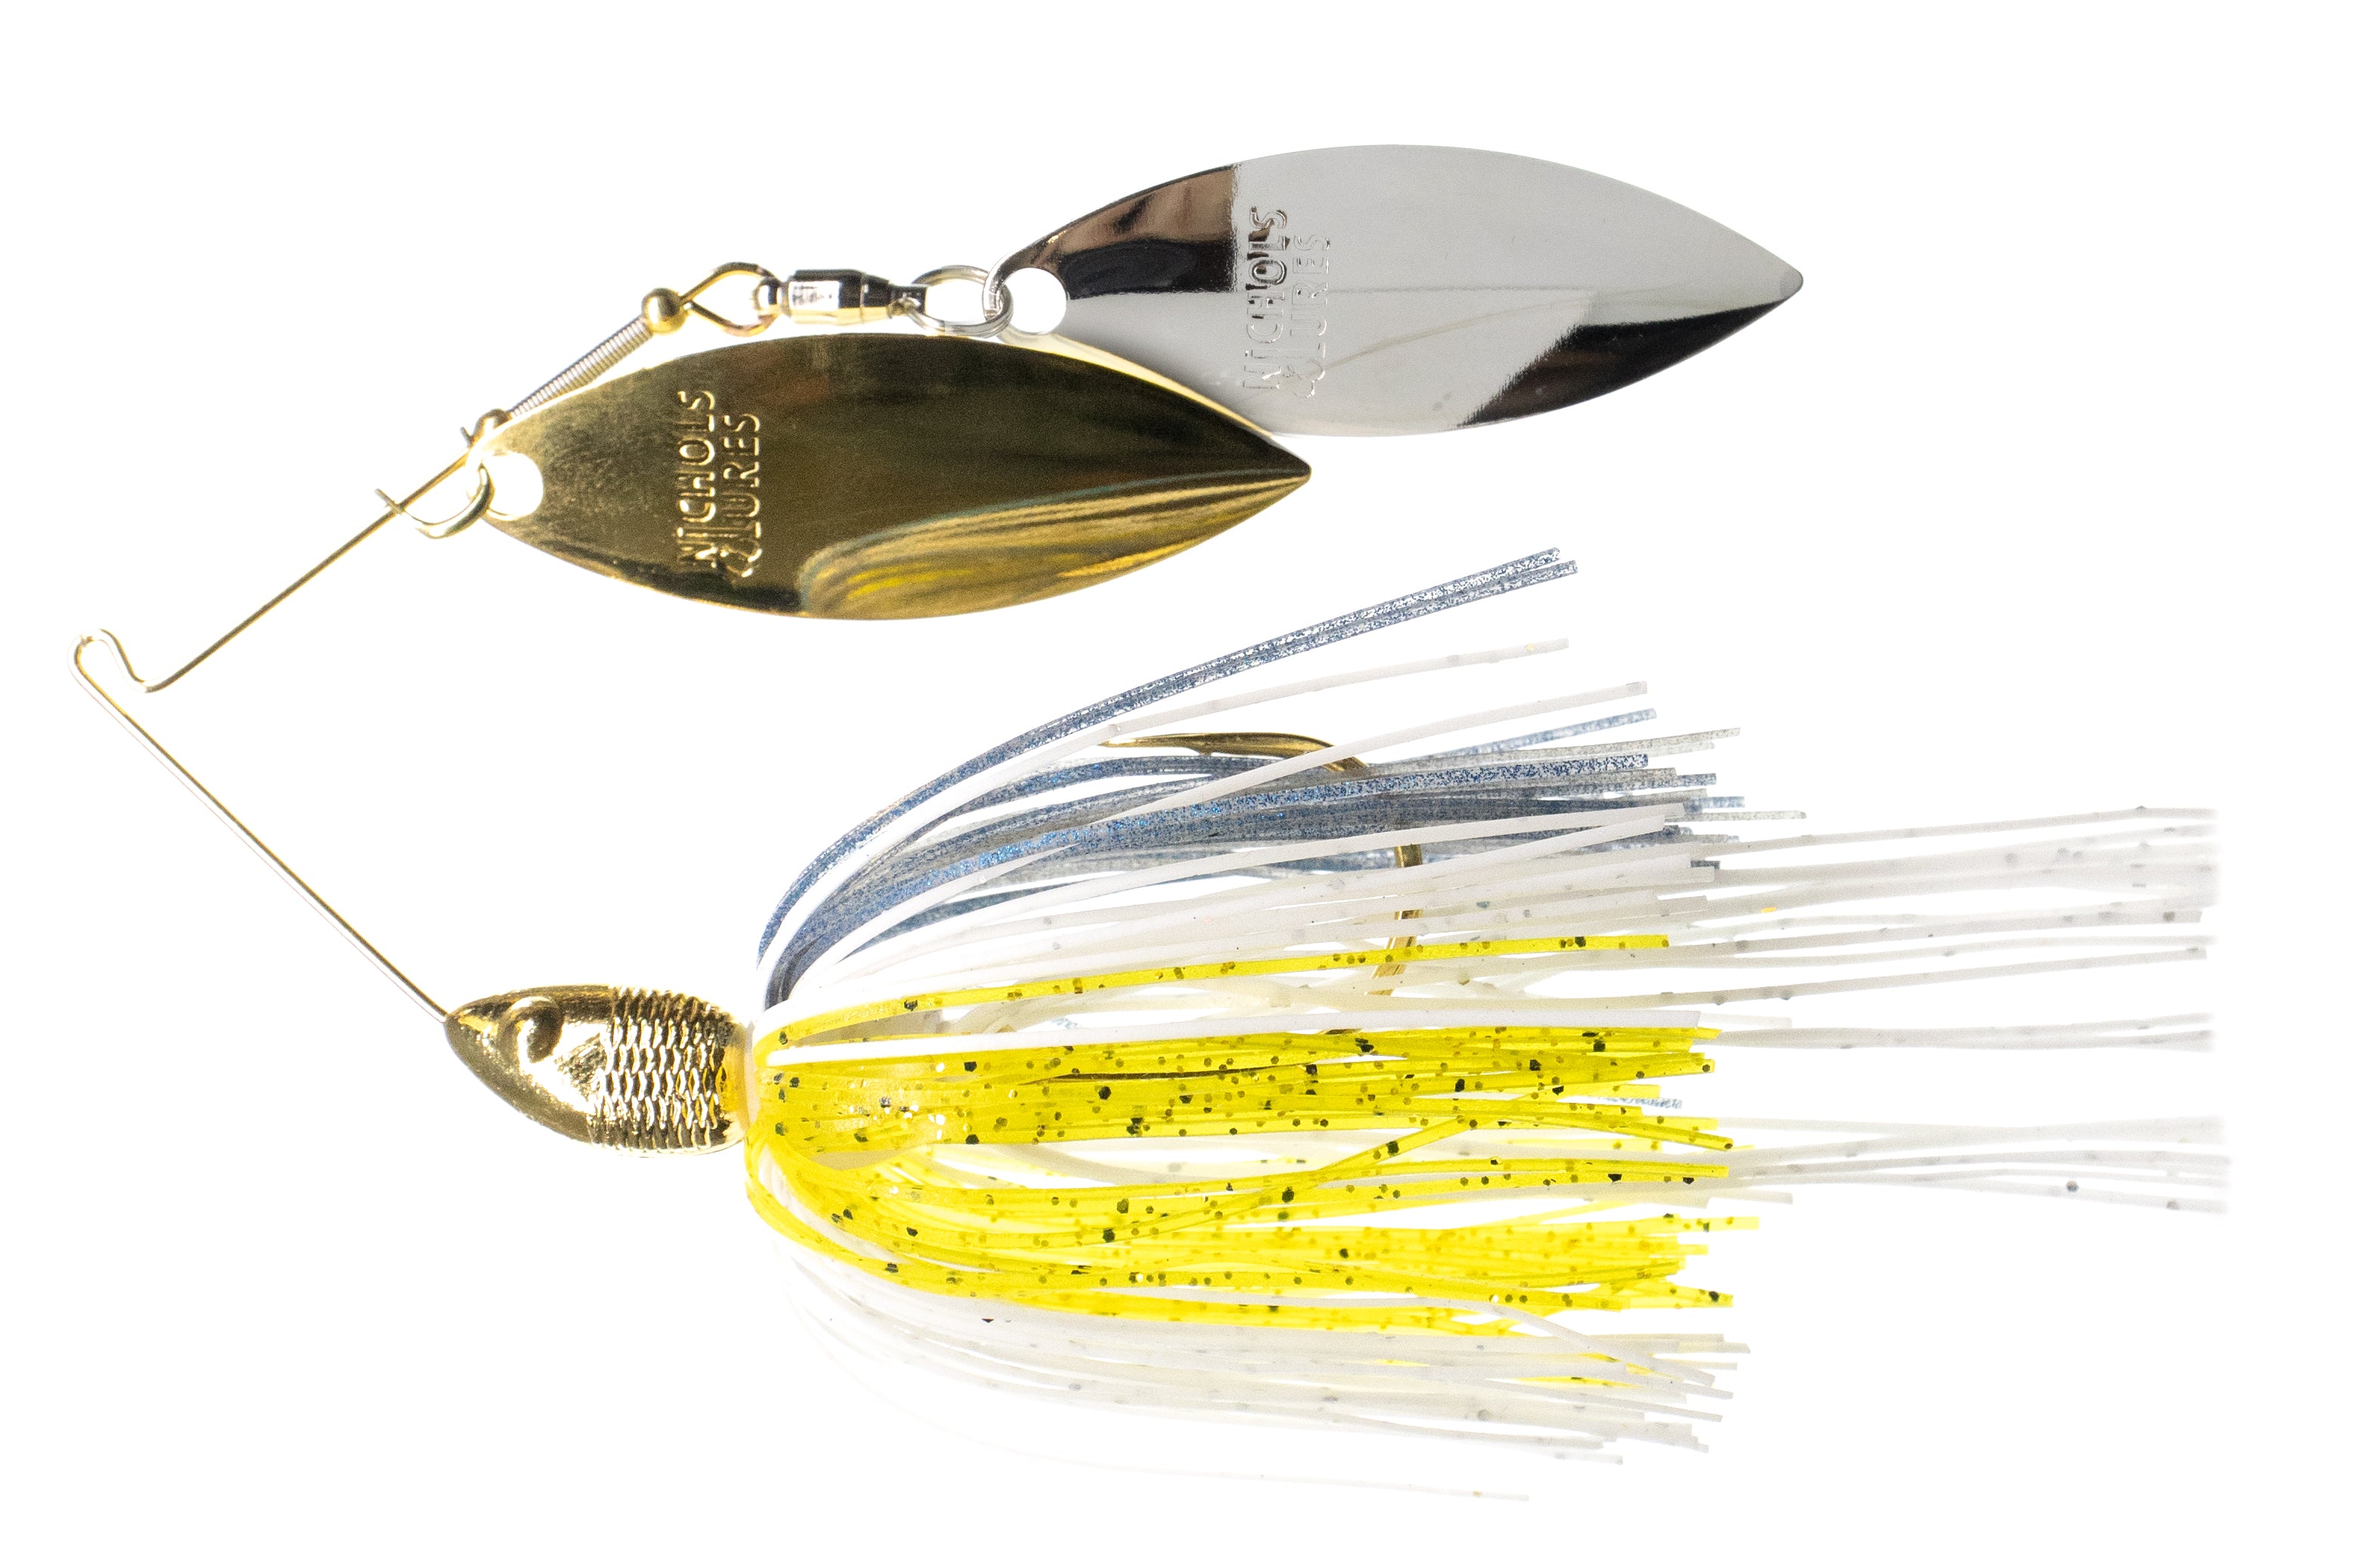 Nichols Lures Pulsator Metal Flake Double Willow Spinnerbait, White/Chartreuse, 1/2-Ounce